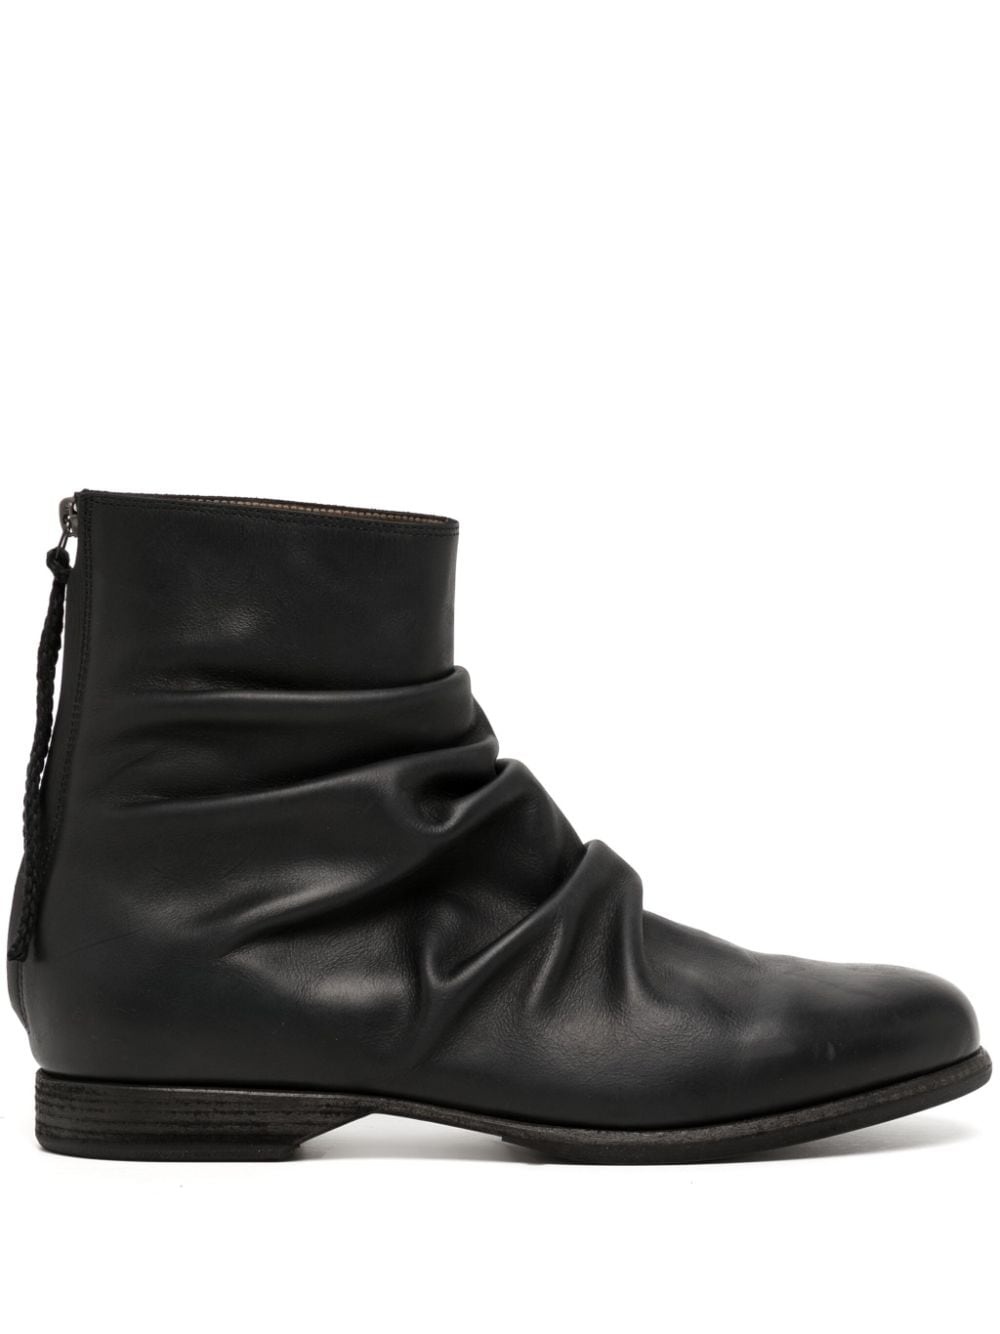 pleat-detail leather boots - 1